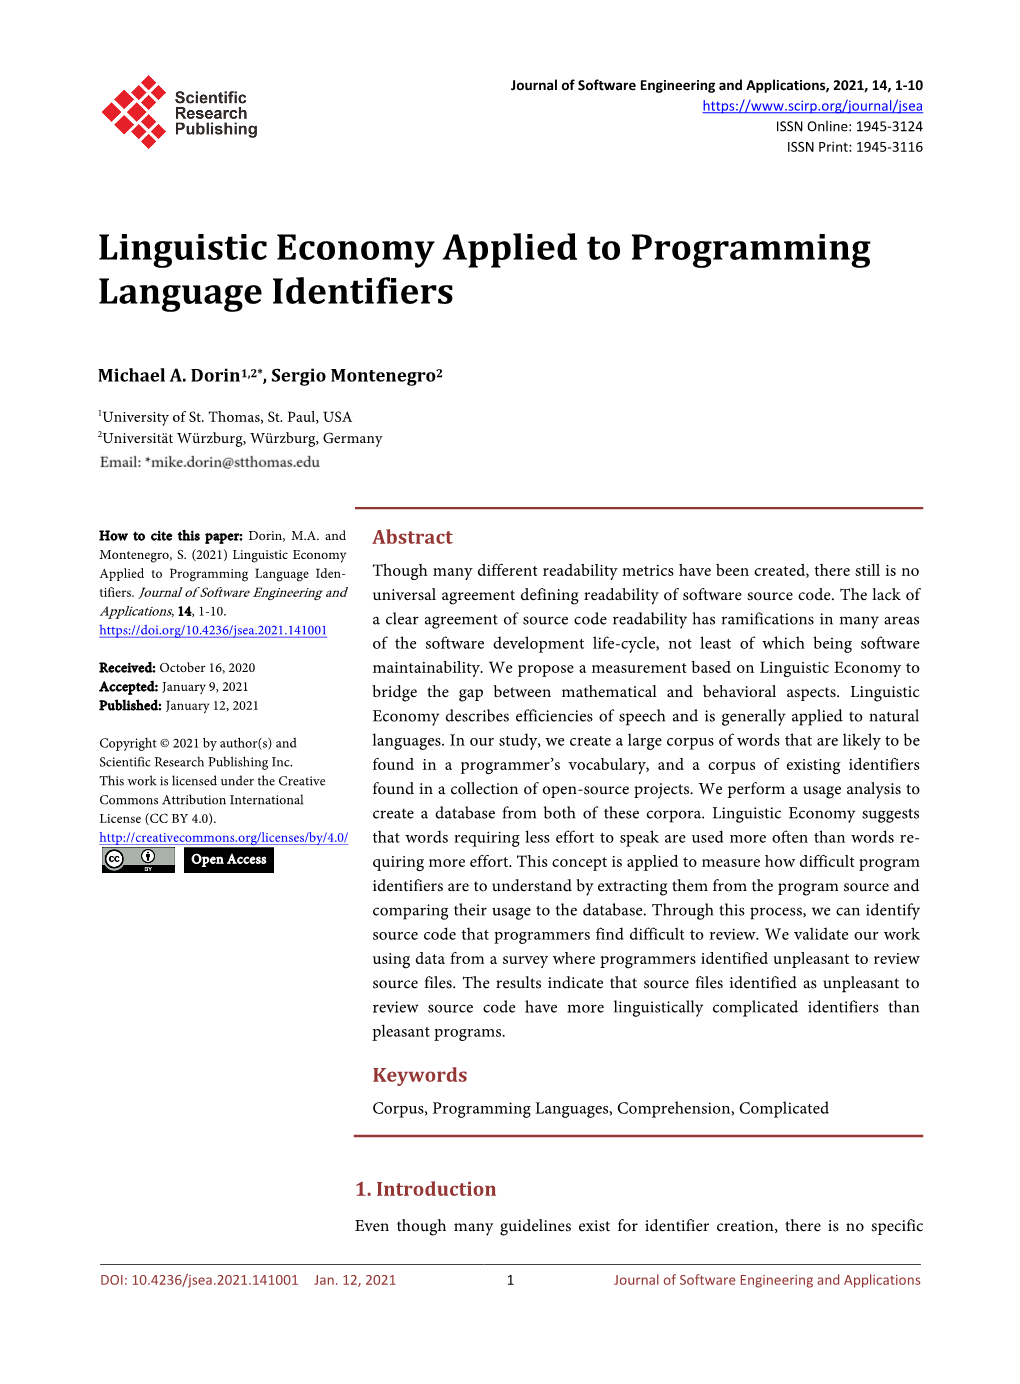 Linguistic Economy Applied to Programming Language Identifiers